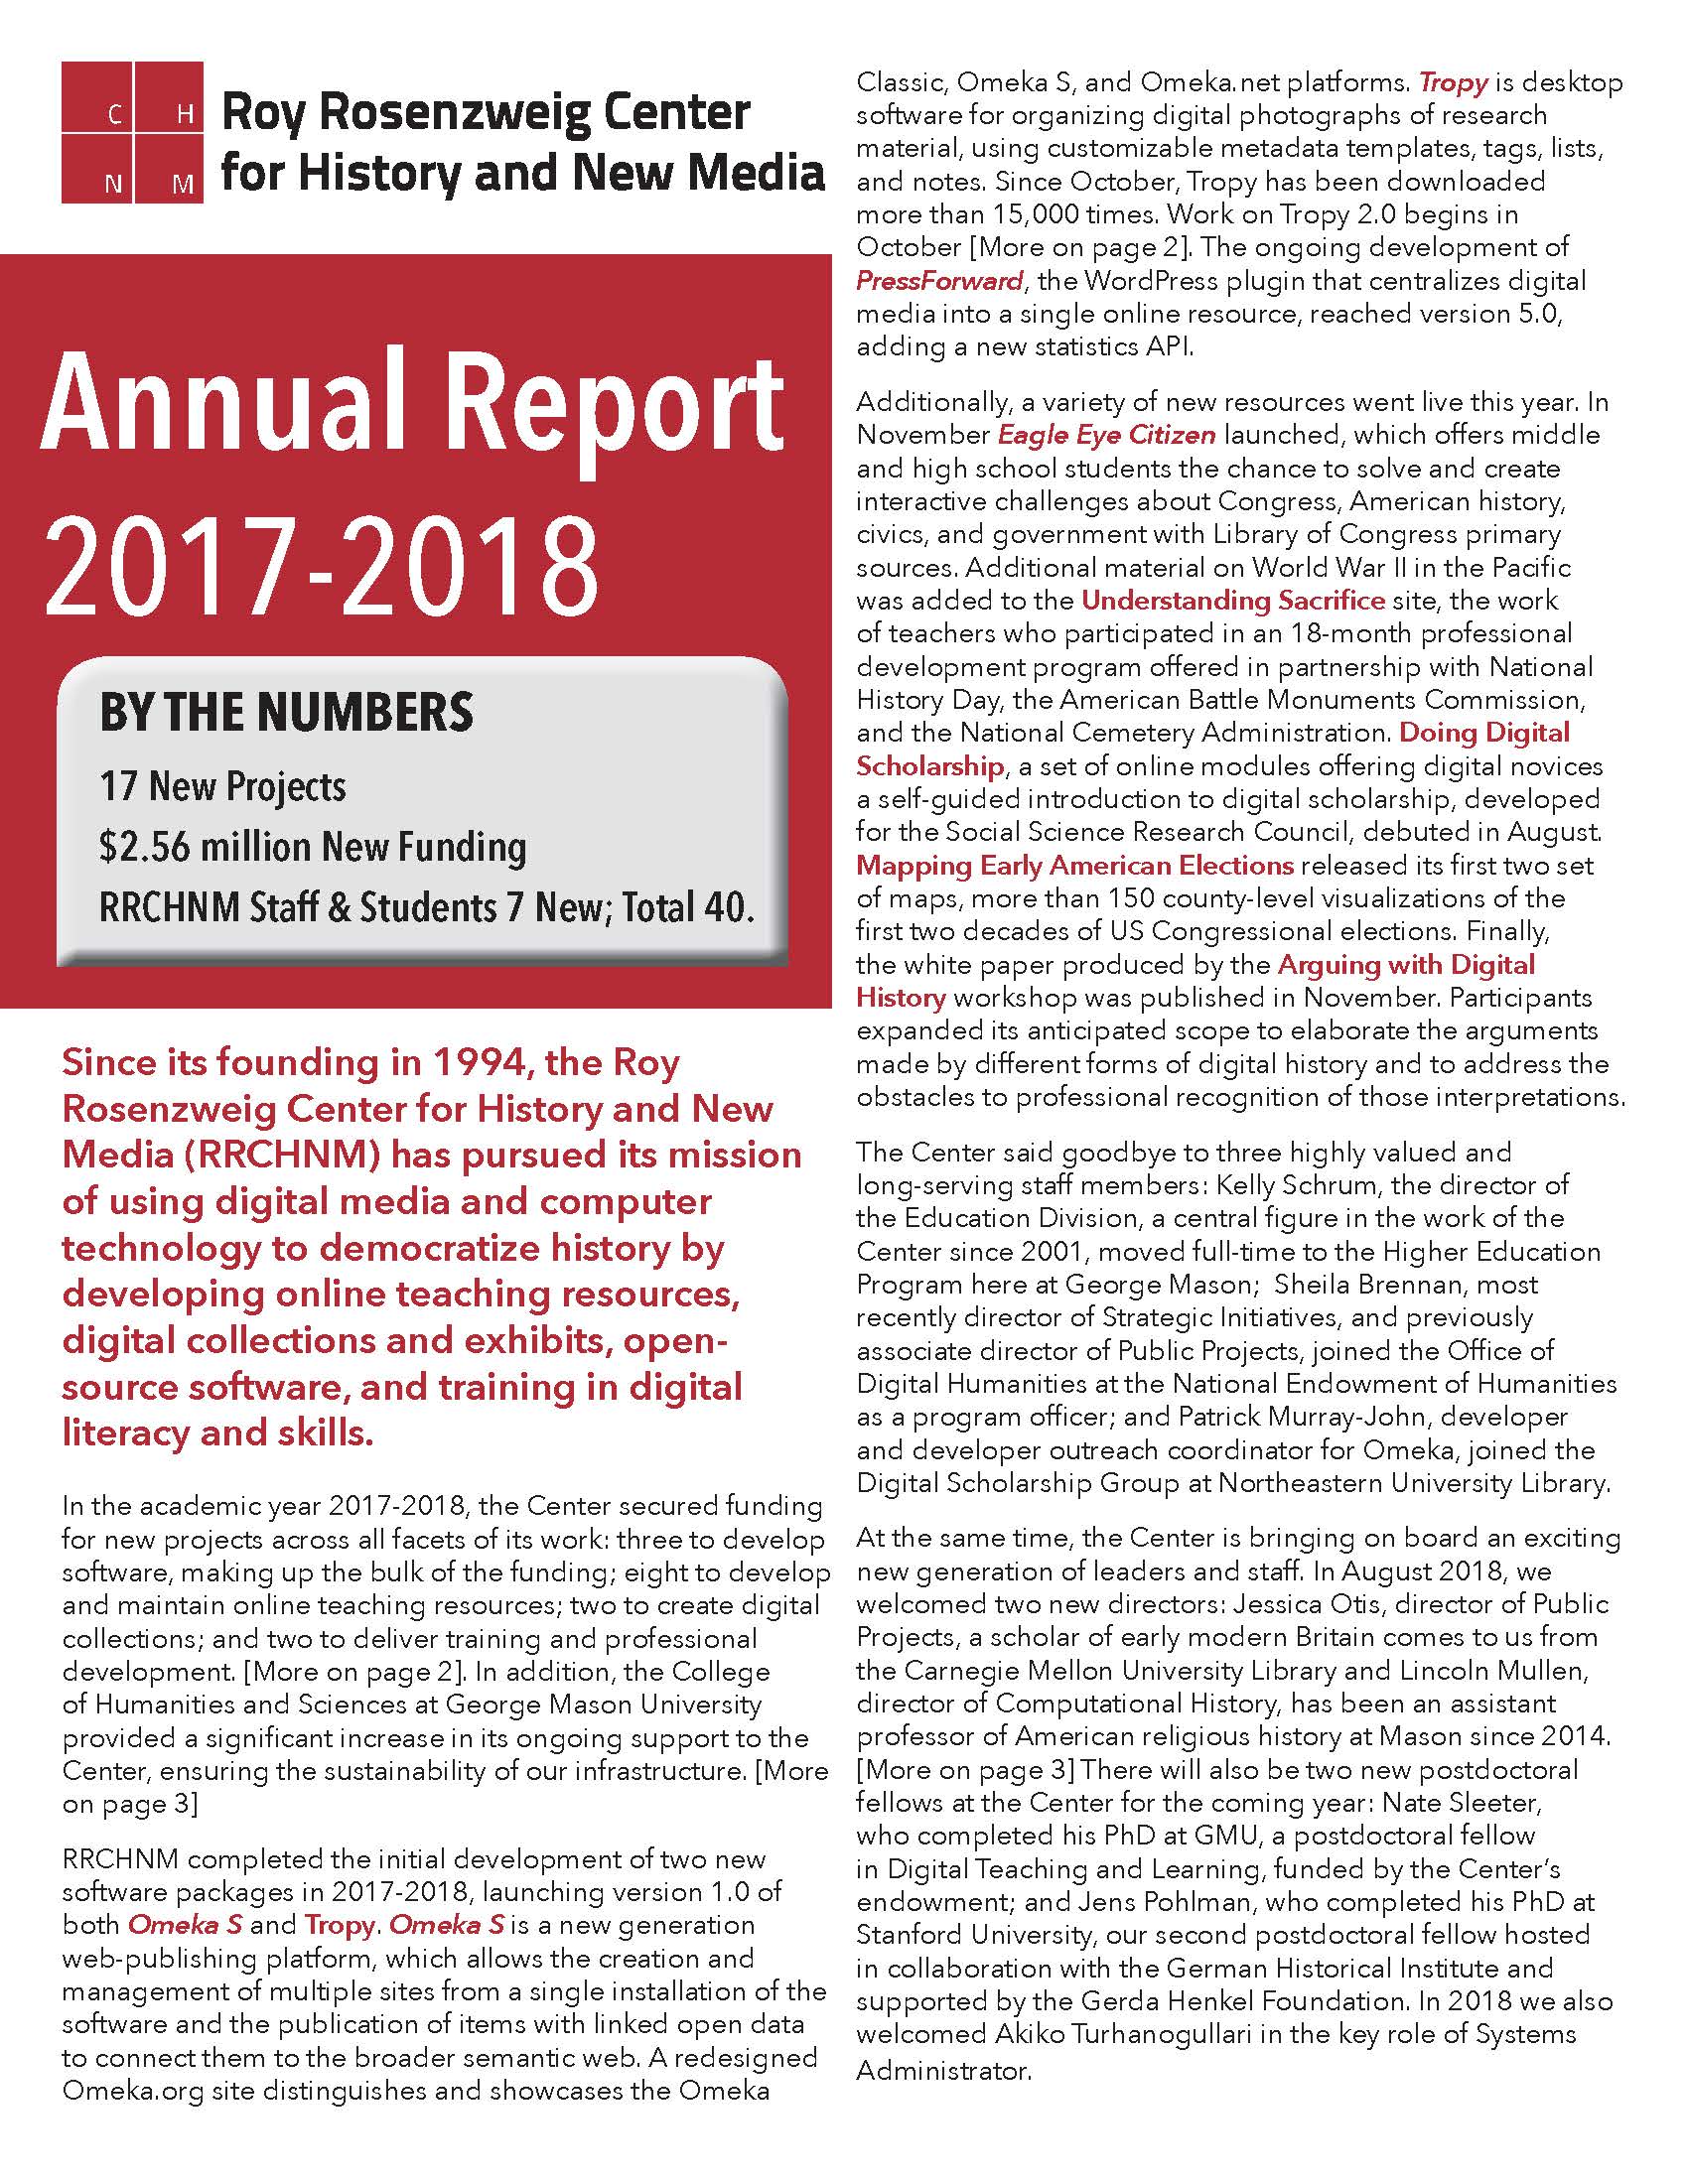 The cover page for the 2017 to 2018 RRCHNM annual report.